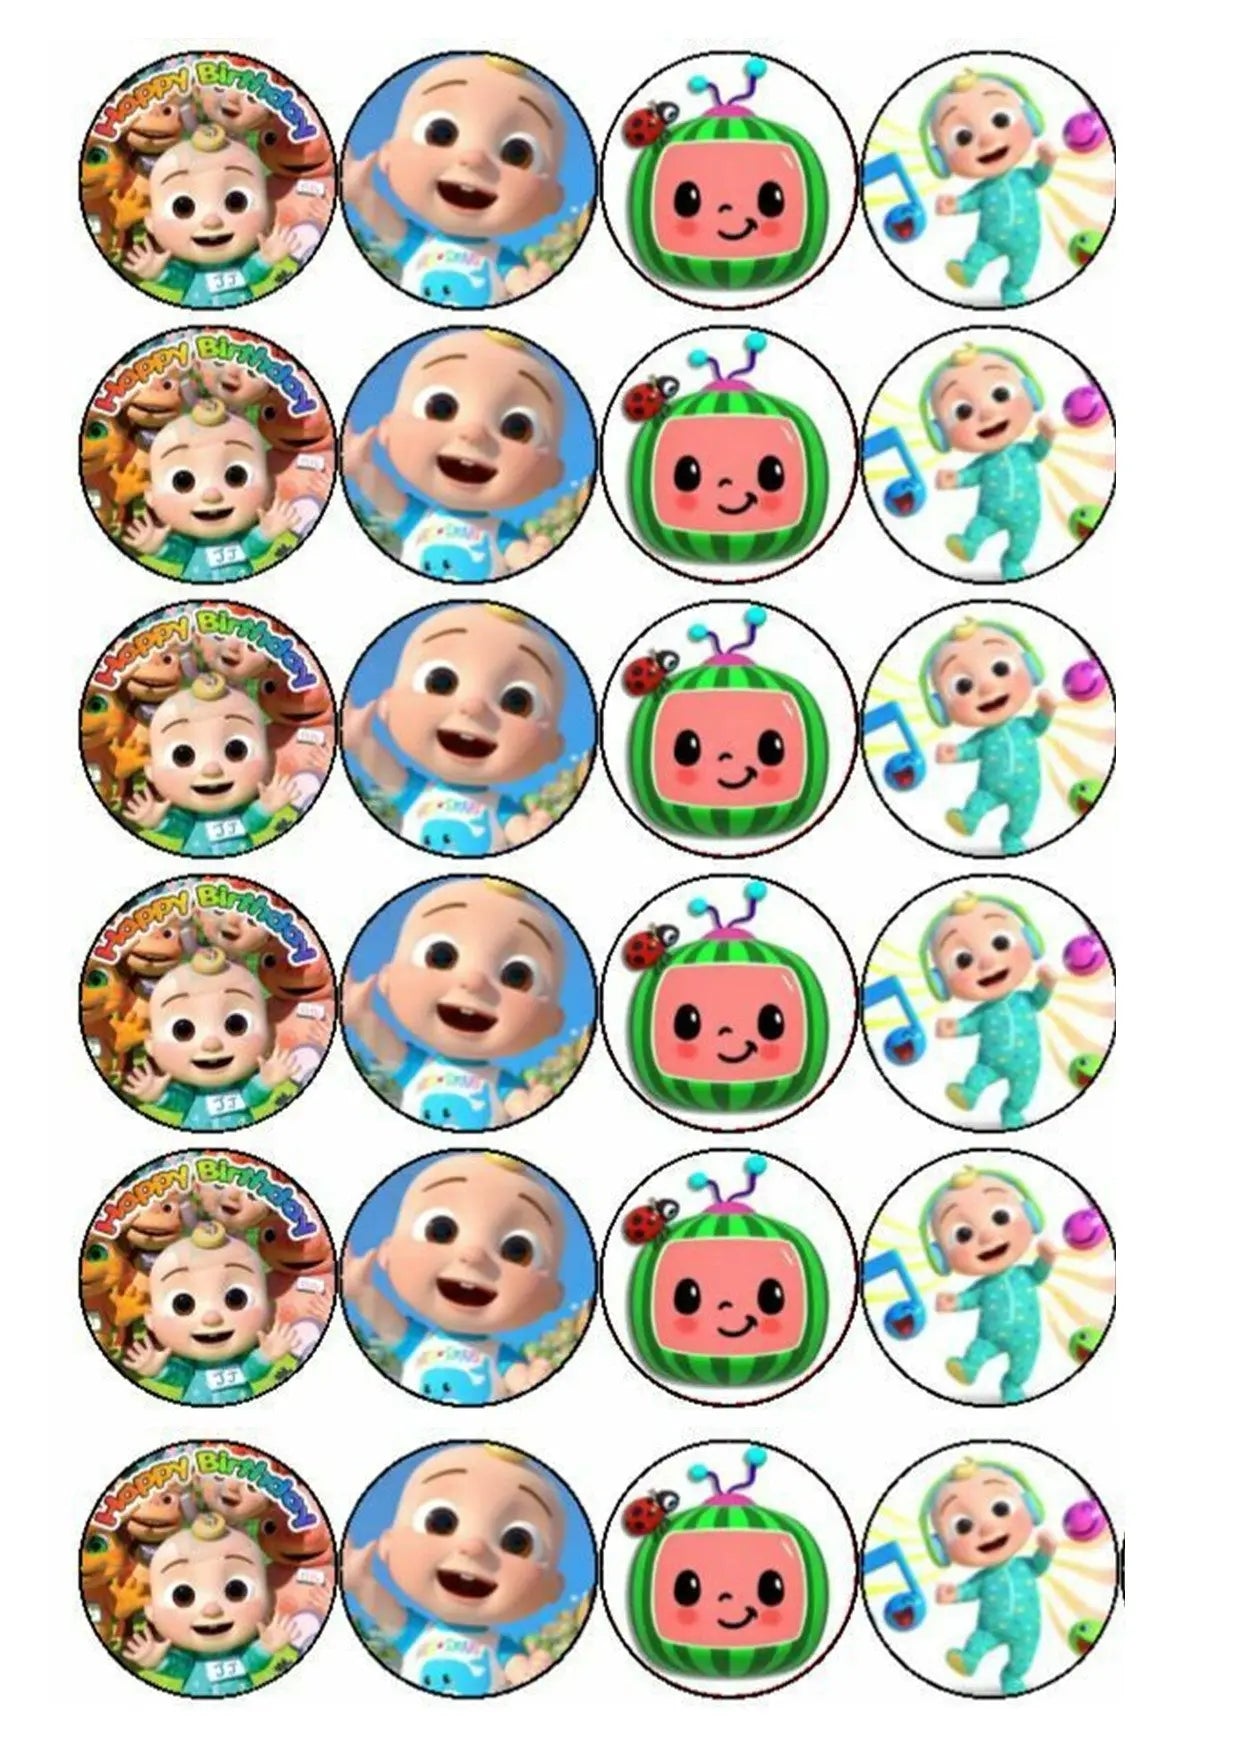 coco-cupcake-toppers-2-amazing-designs-us-cupcake-toppers-boy